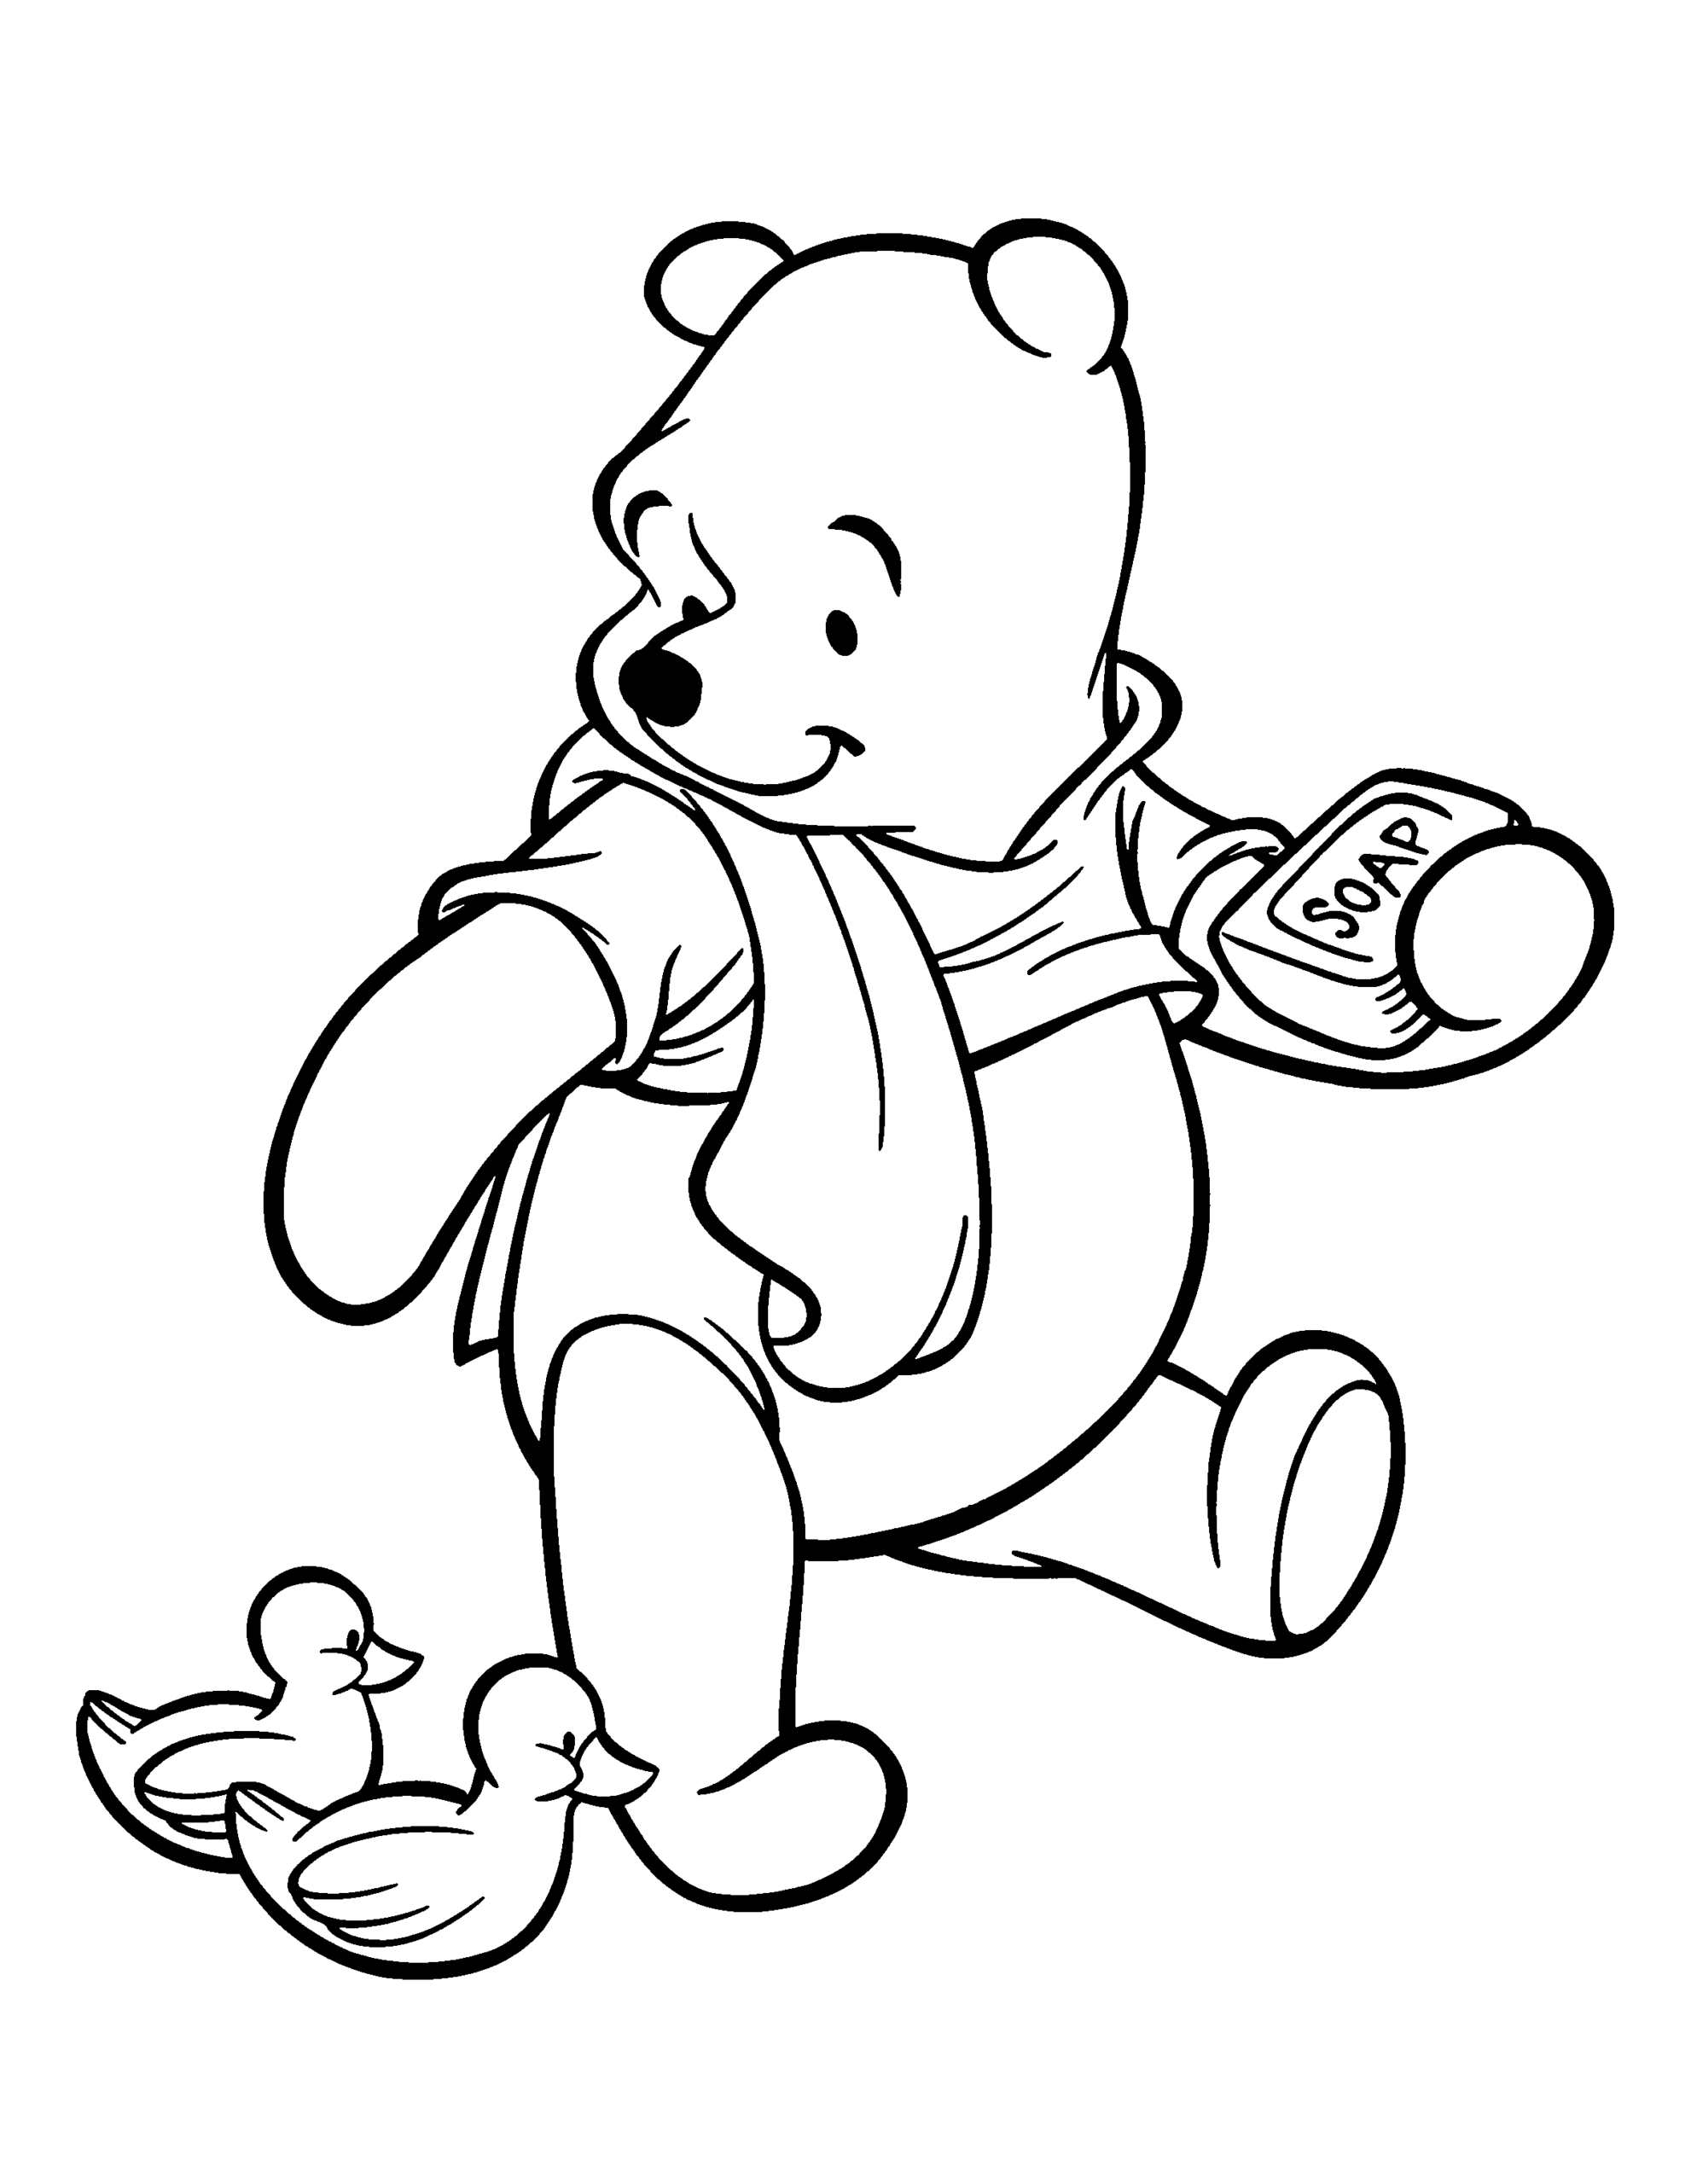 Winnie the Pooh Coloring Pages Cartoons Disney Winnie The Pooh Printable 2020 6952 Coloring4free